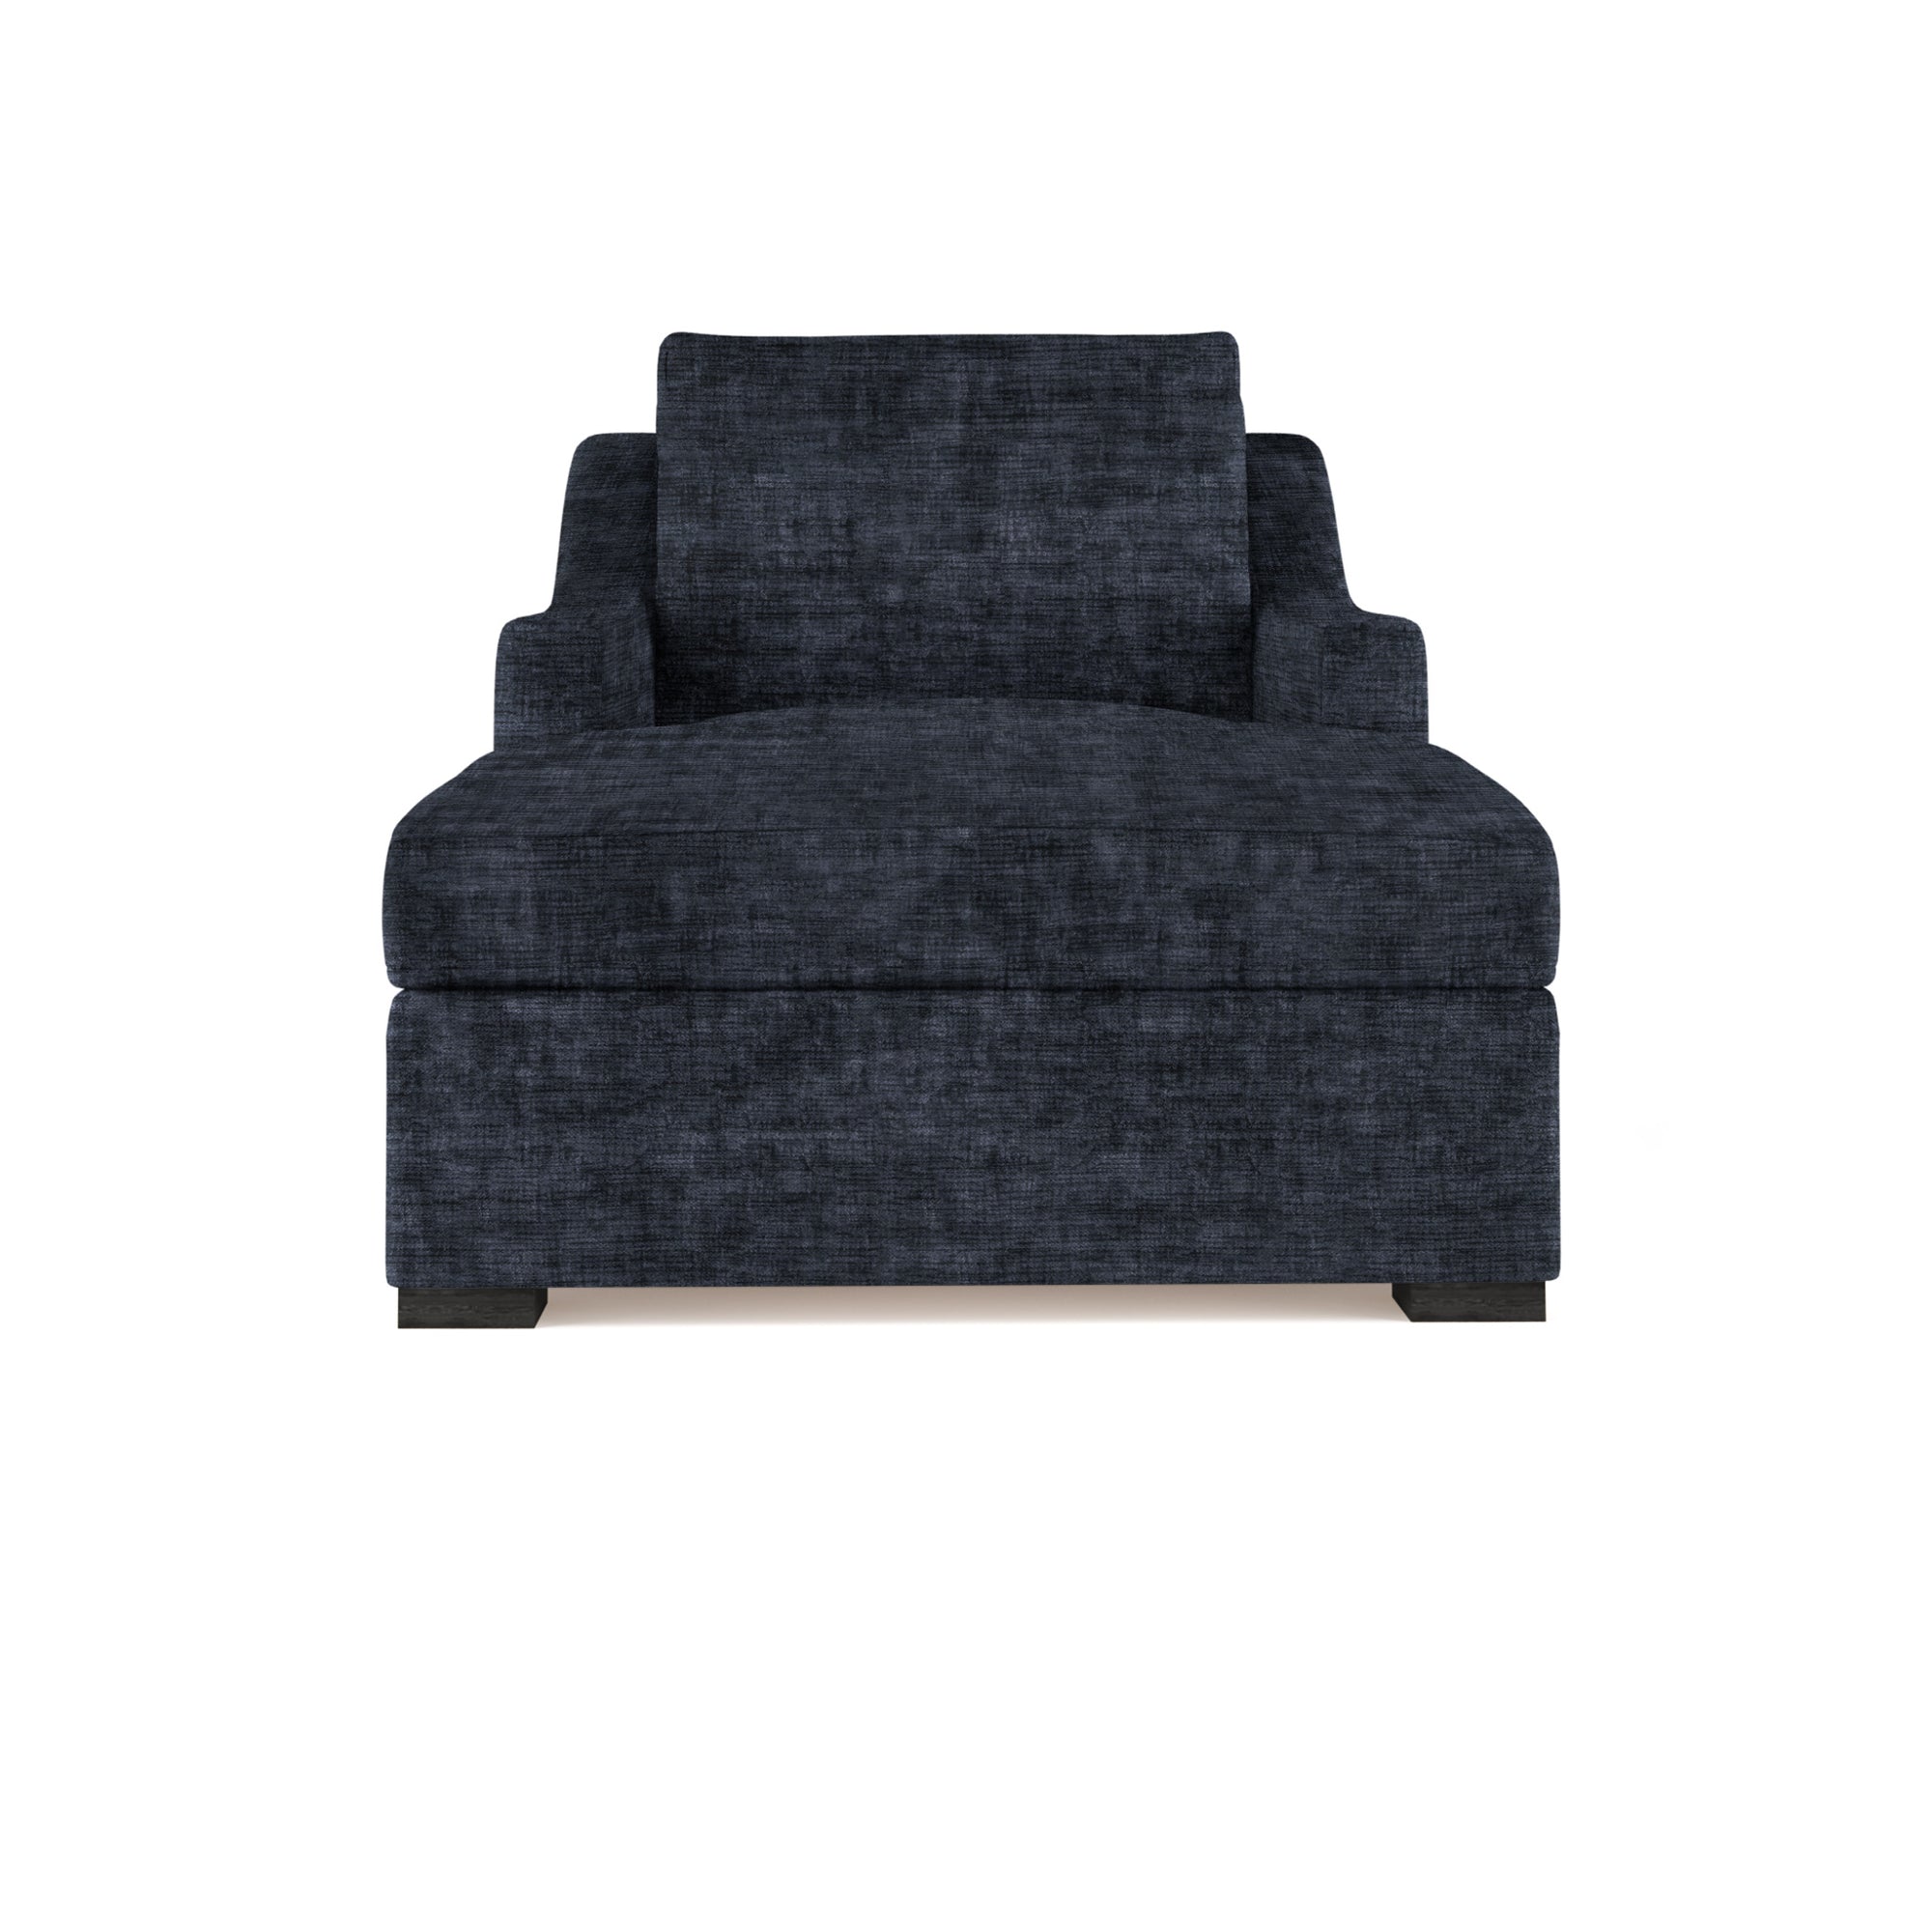 Crosby Chaise - Blue Print Crushed Velvet